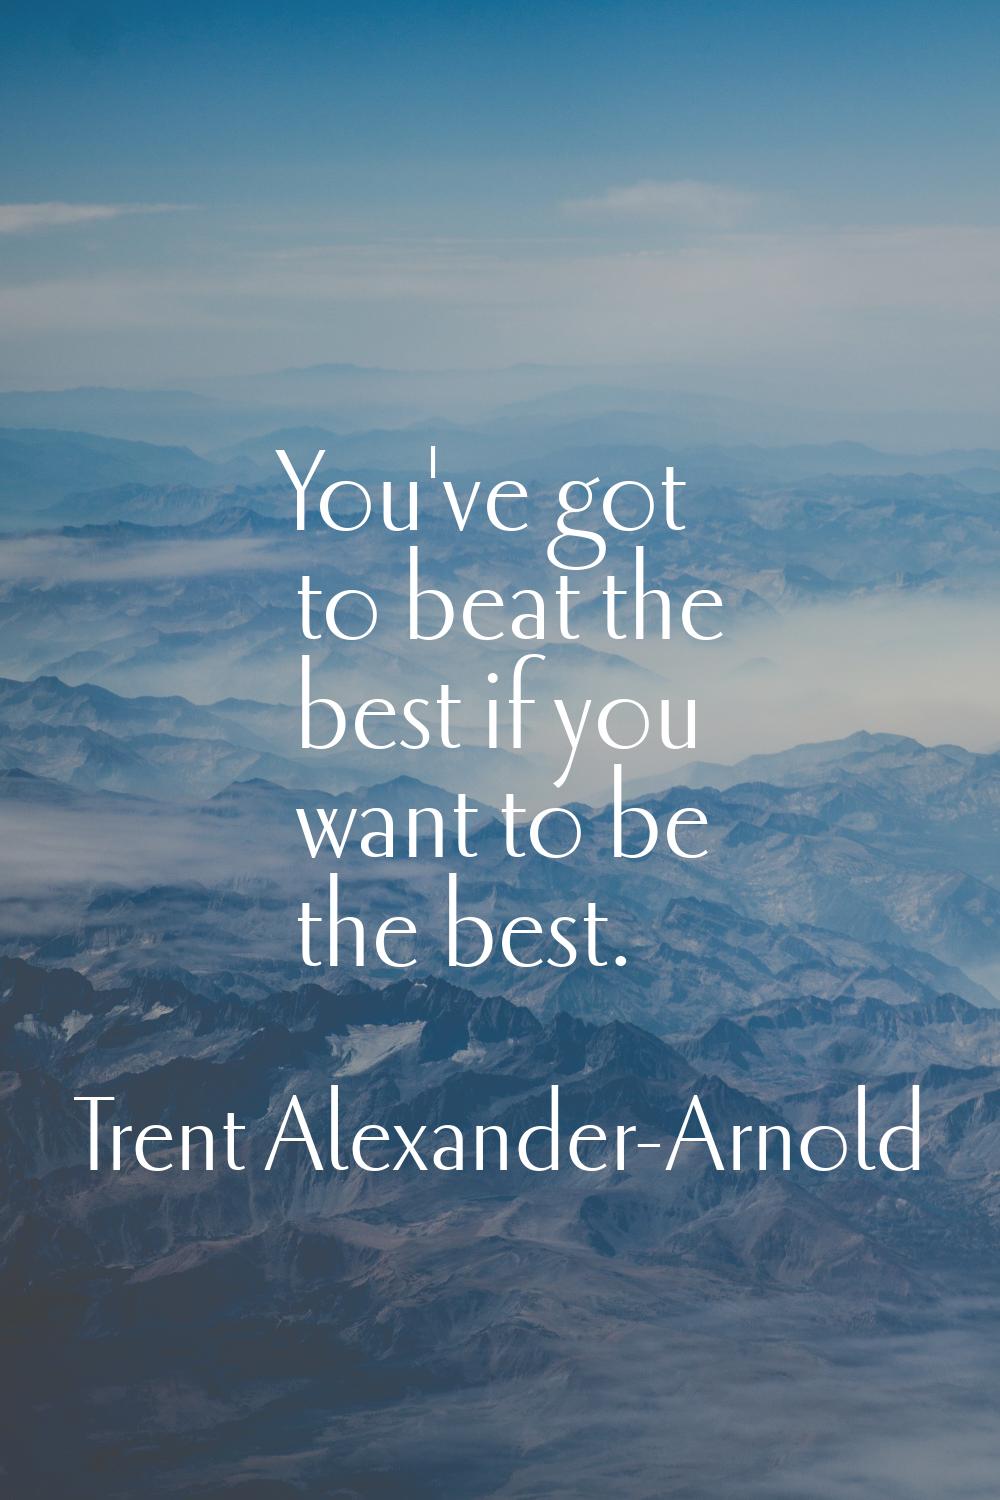 You've got to beat the best if you want to be the best.